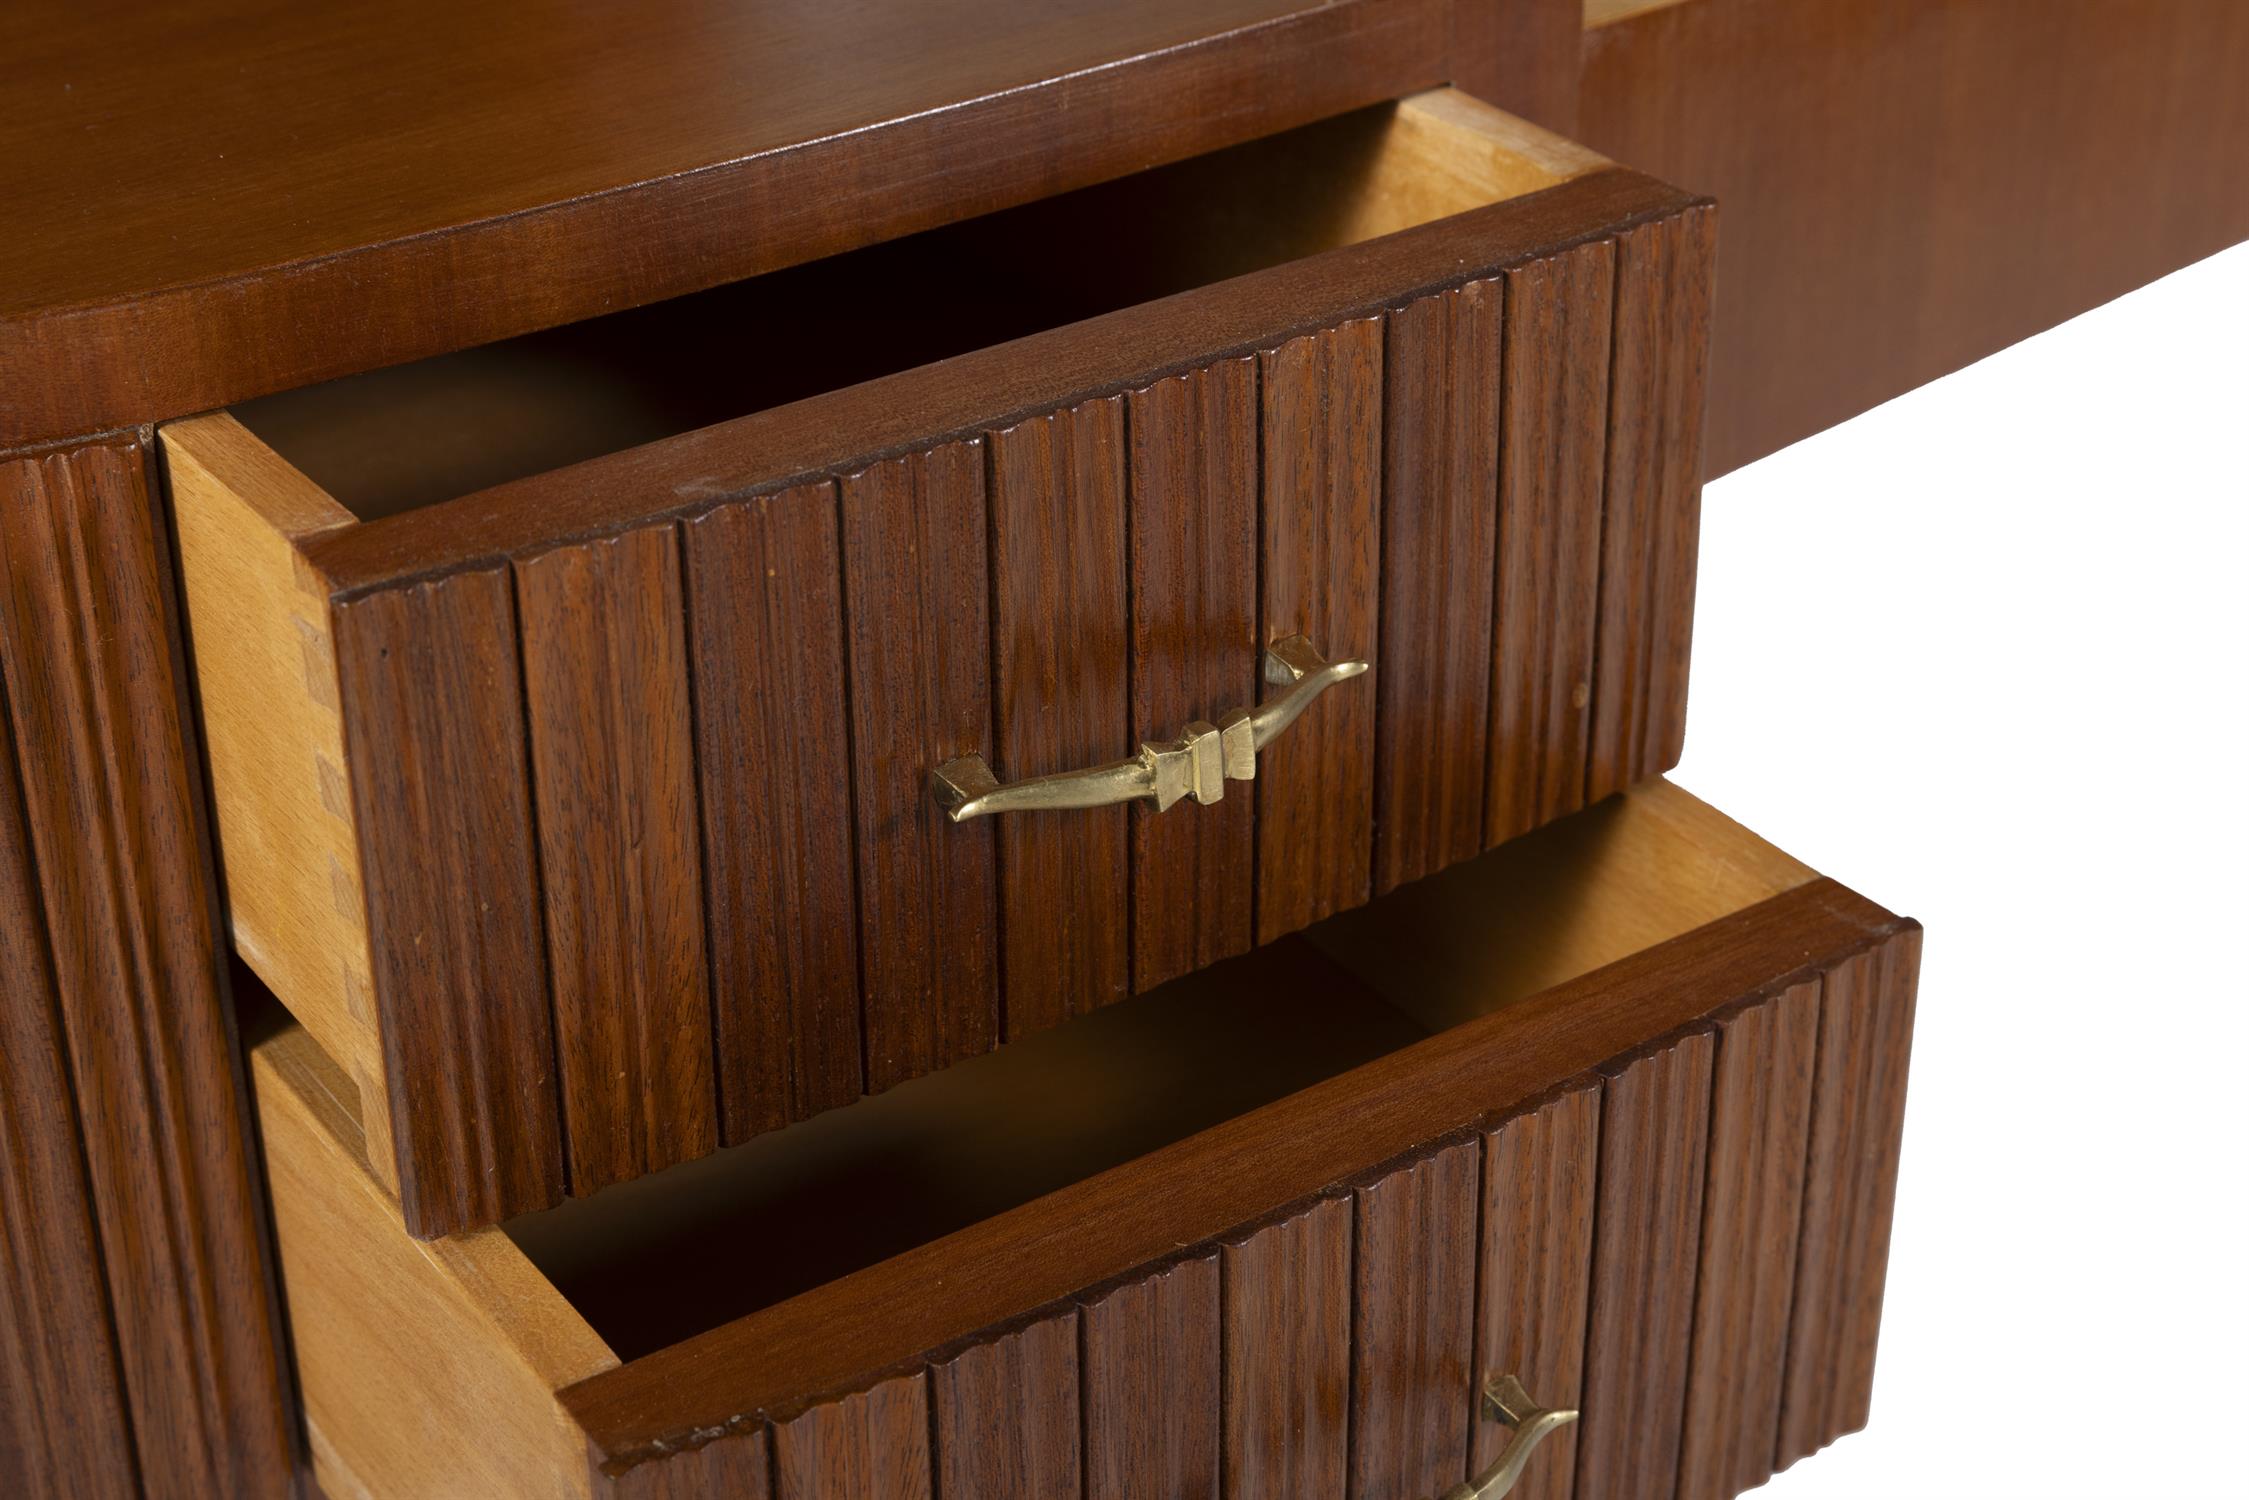 PAOLO BUFFA (1903 - 1970) A mahogany dressing table by Paolo Buffa for Ducrot with maple interior - Image 8 of 10